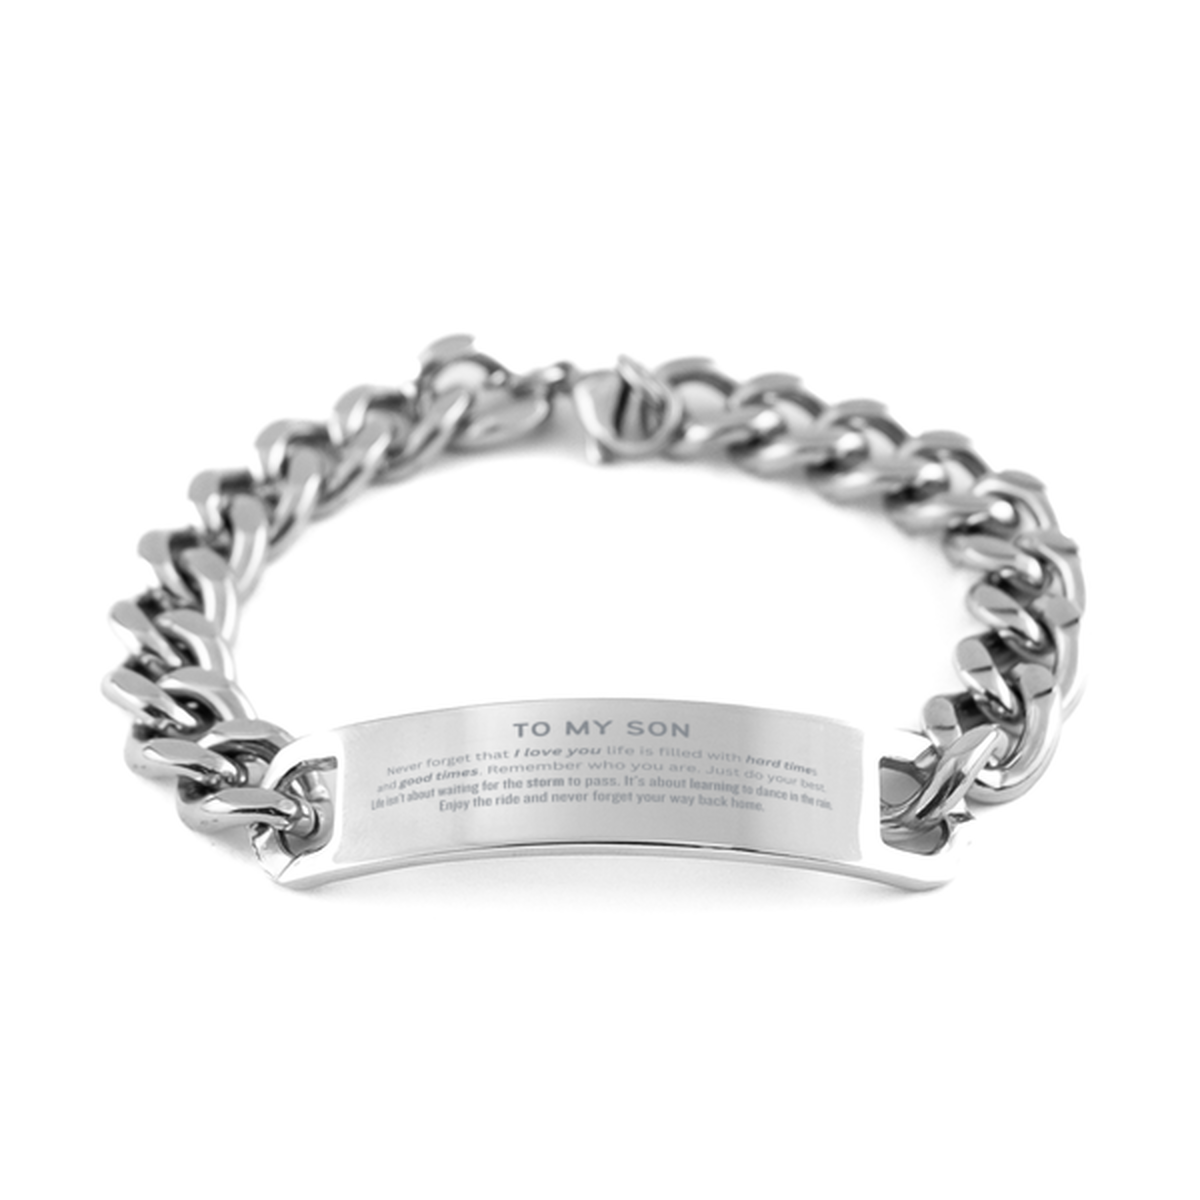 Christmas Son Cuban Chain Stainless Steel Bracelet Gifts, To My Son Birthday Thank You Gifts For Son, Graduation Unique Gifts For Son To My Son Never forget that I love you life is filled with hard times and good times. Remember who you are. Just do your